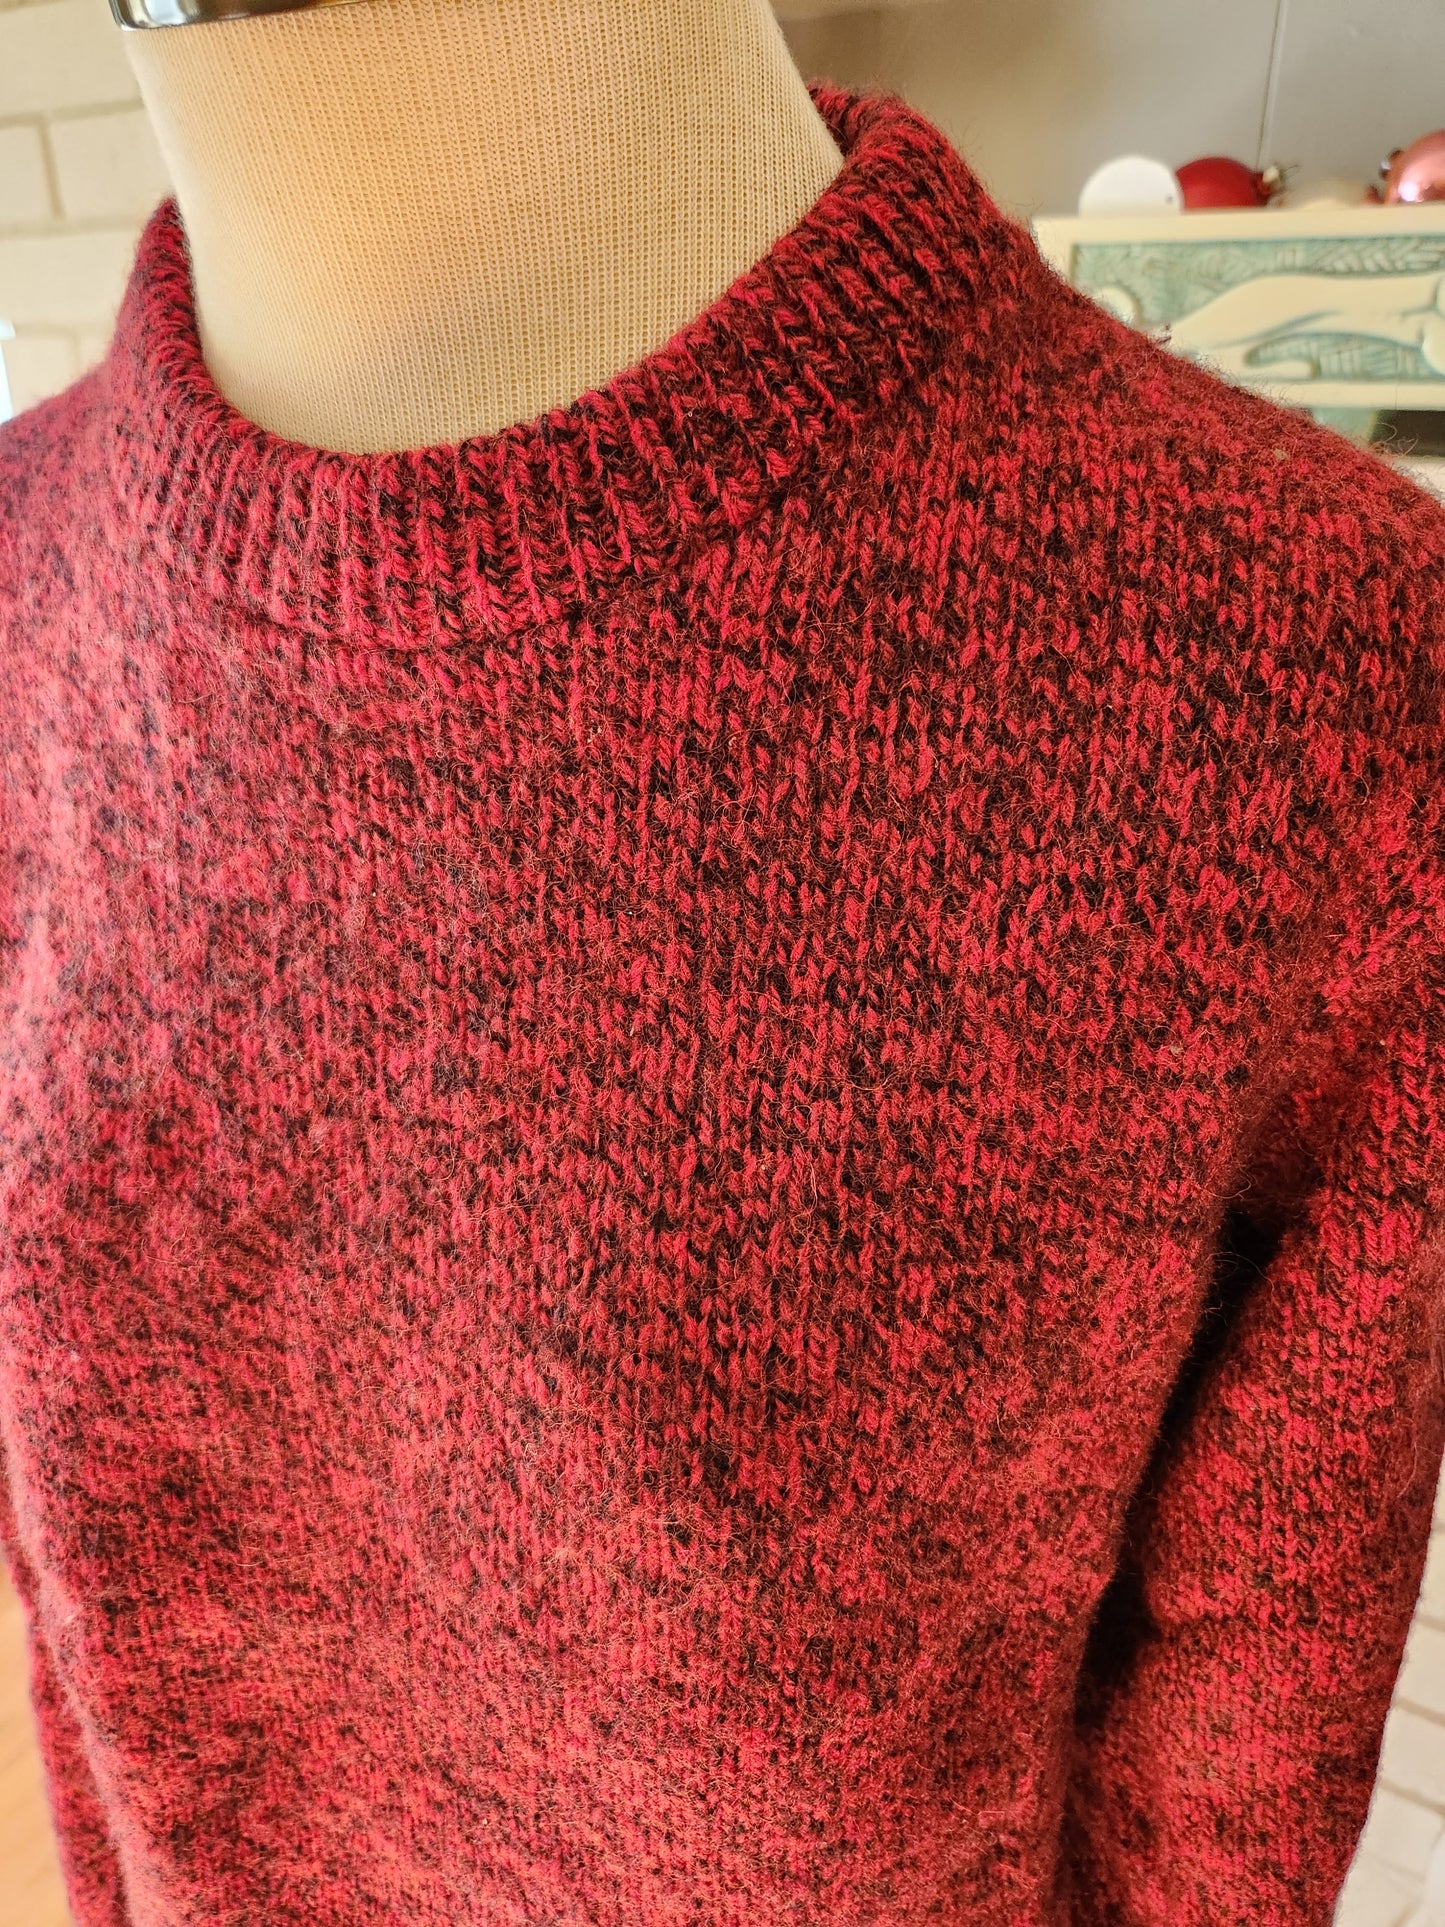 Vintage Red and Black Sweater by Lands' End